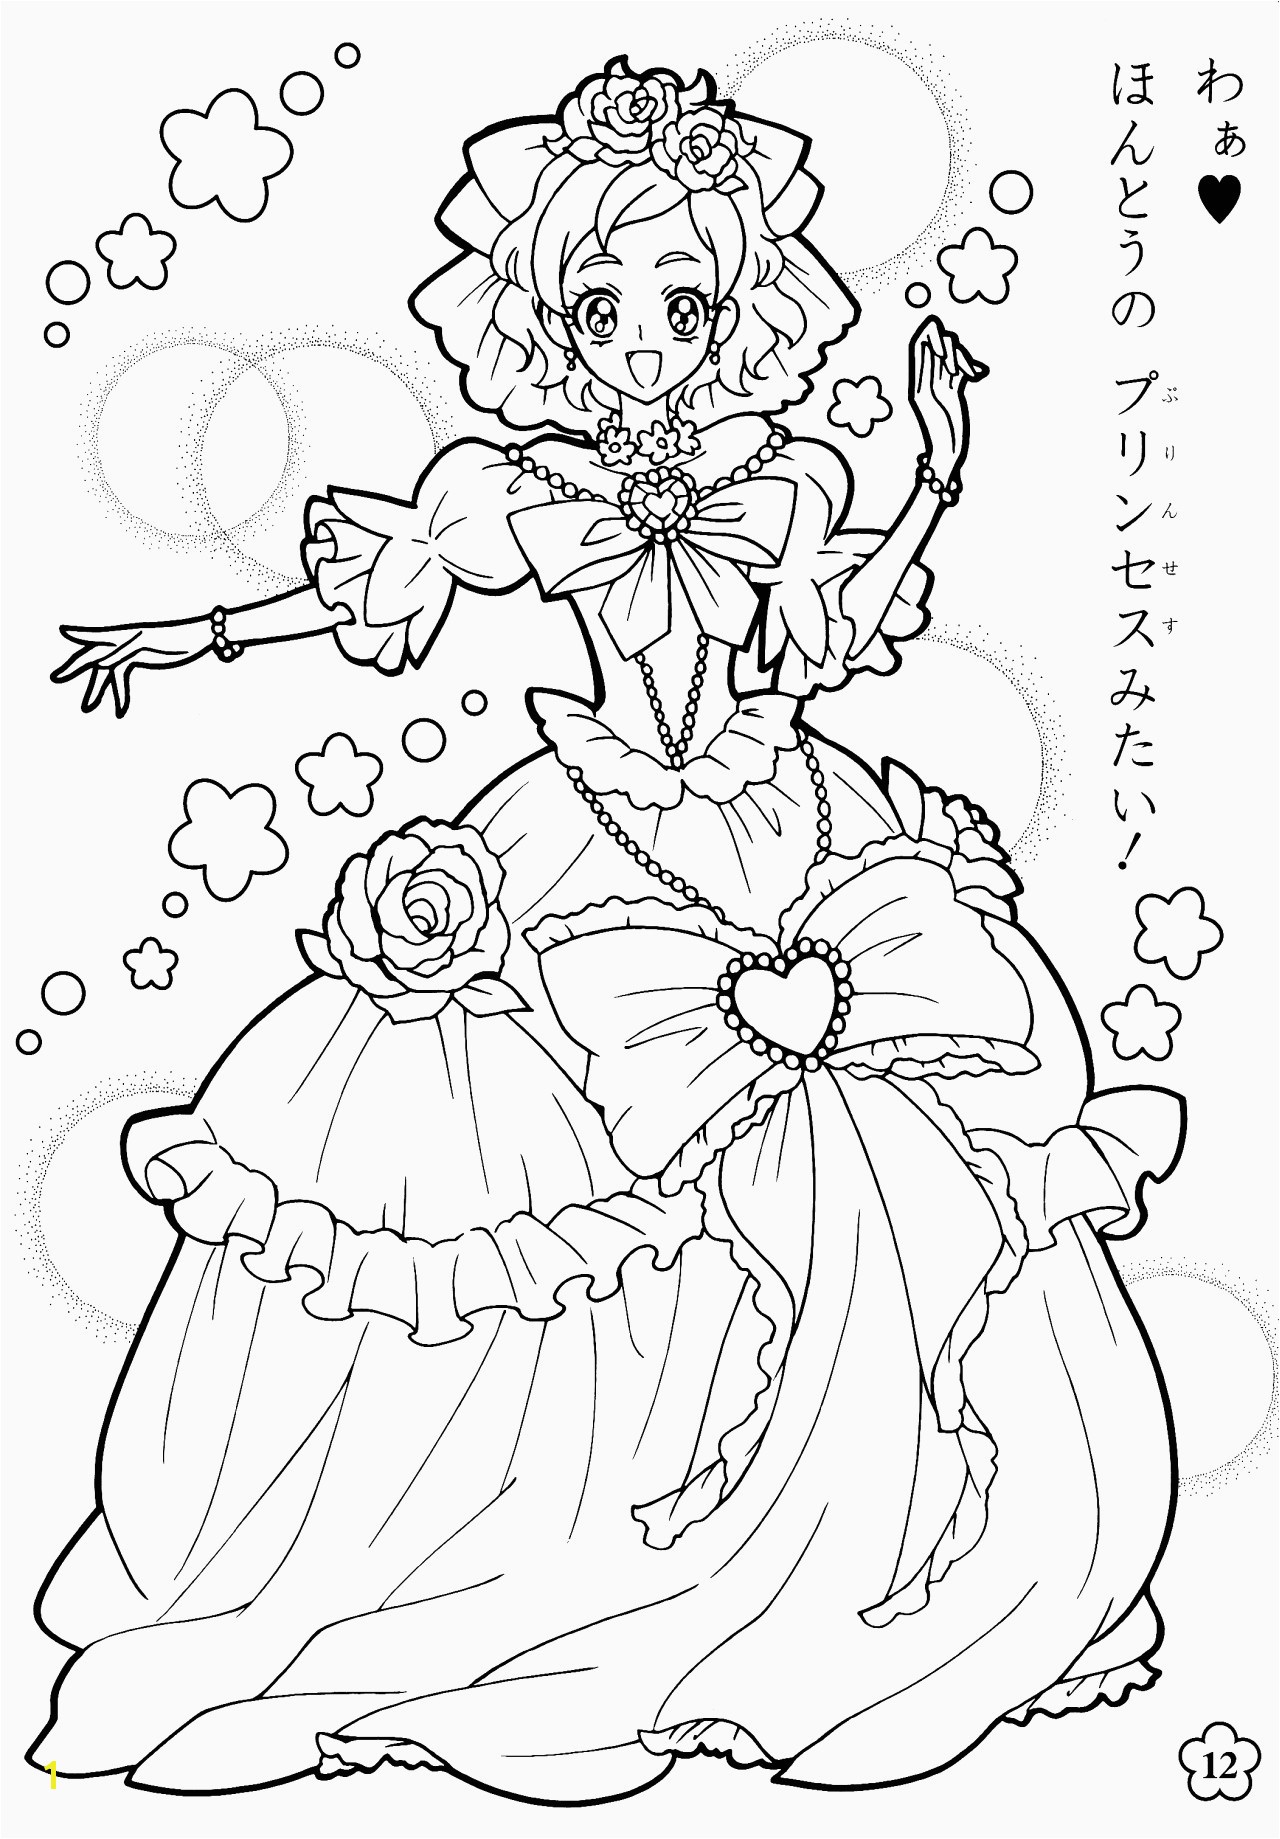 Coloring Pages Showing Respect Respect Coloring Sheets Elegant Cool Coloring Page Unique Witch